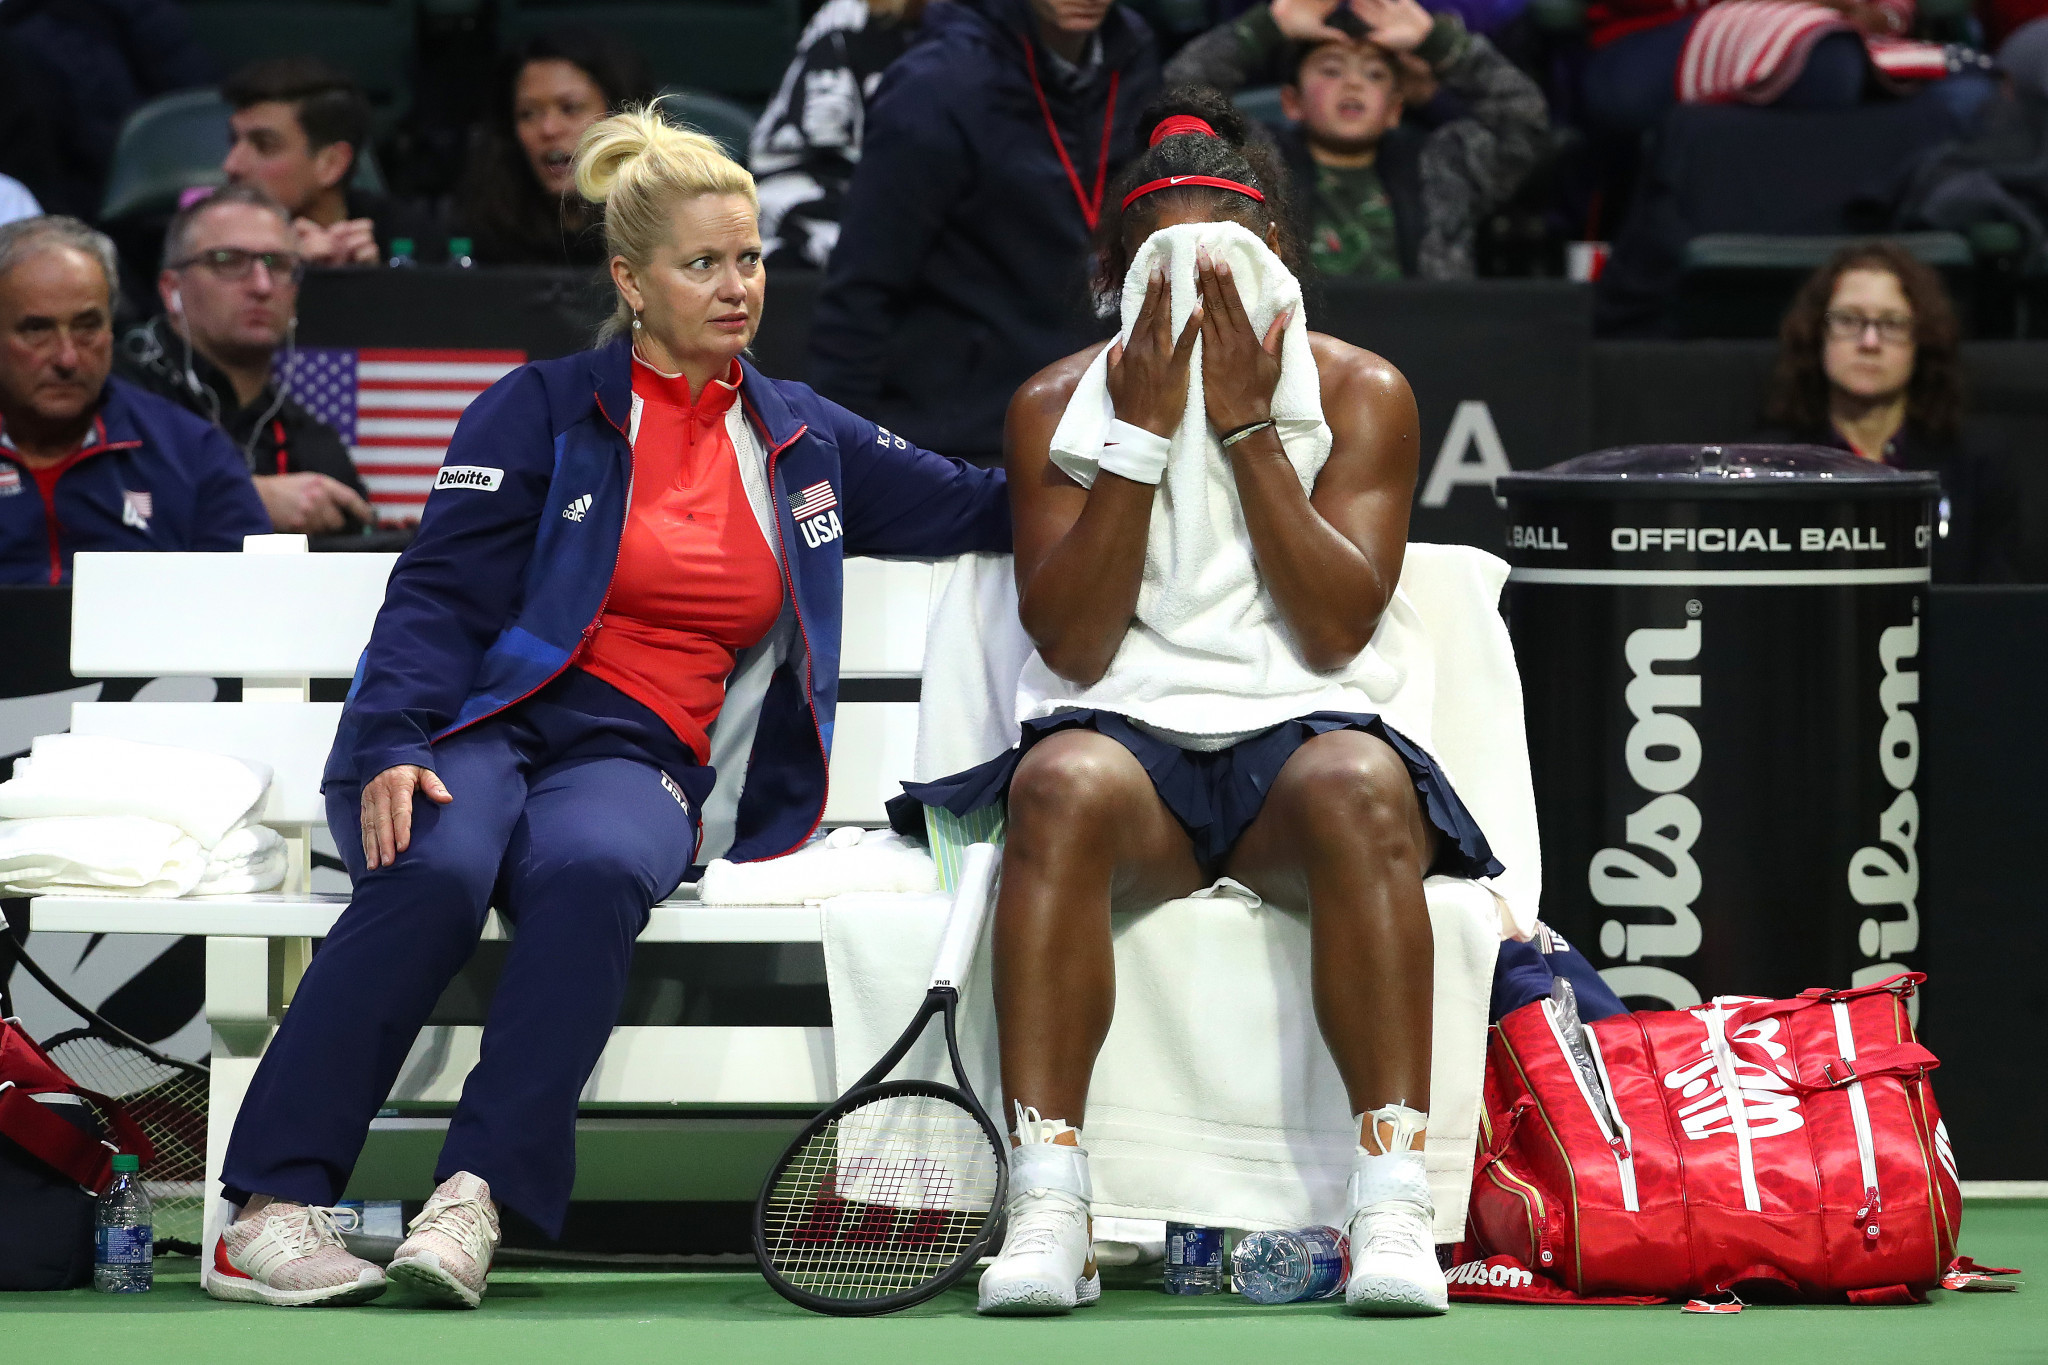 Serena Williams could not defeat Anastasija Sevastova in the United States' clash with Latvia, but the US side eventually progressed ©Getty Images